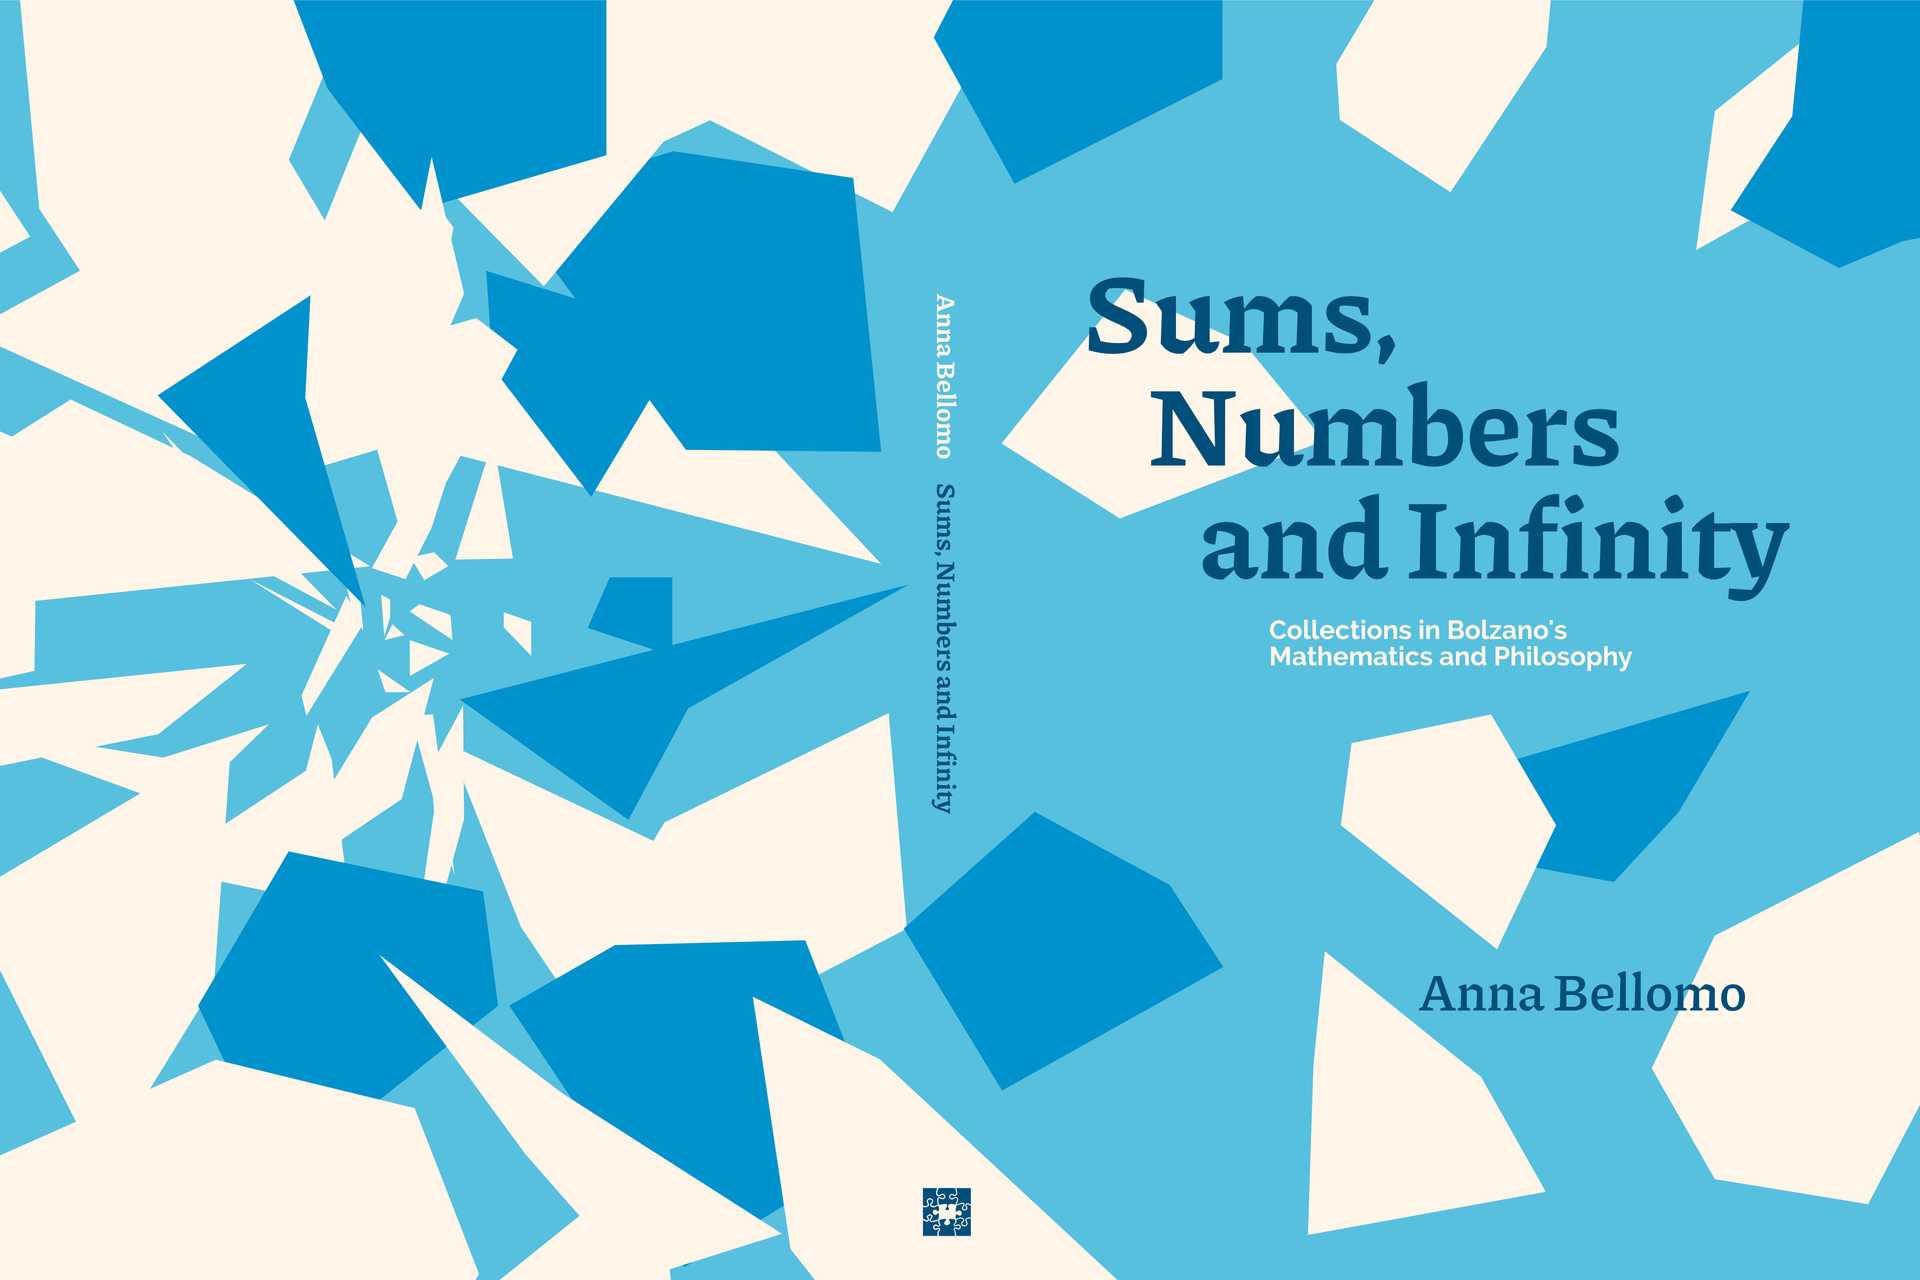 Image 2 of project 'Sums, Numbers and Infinity'